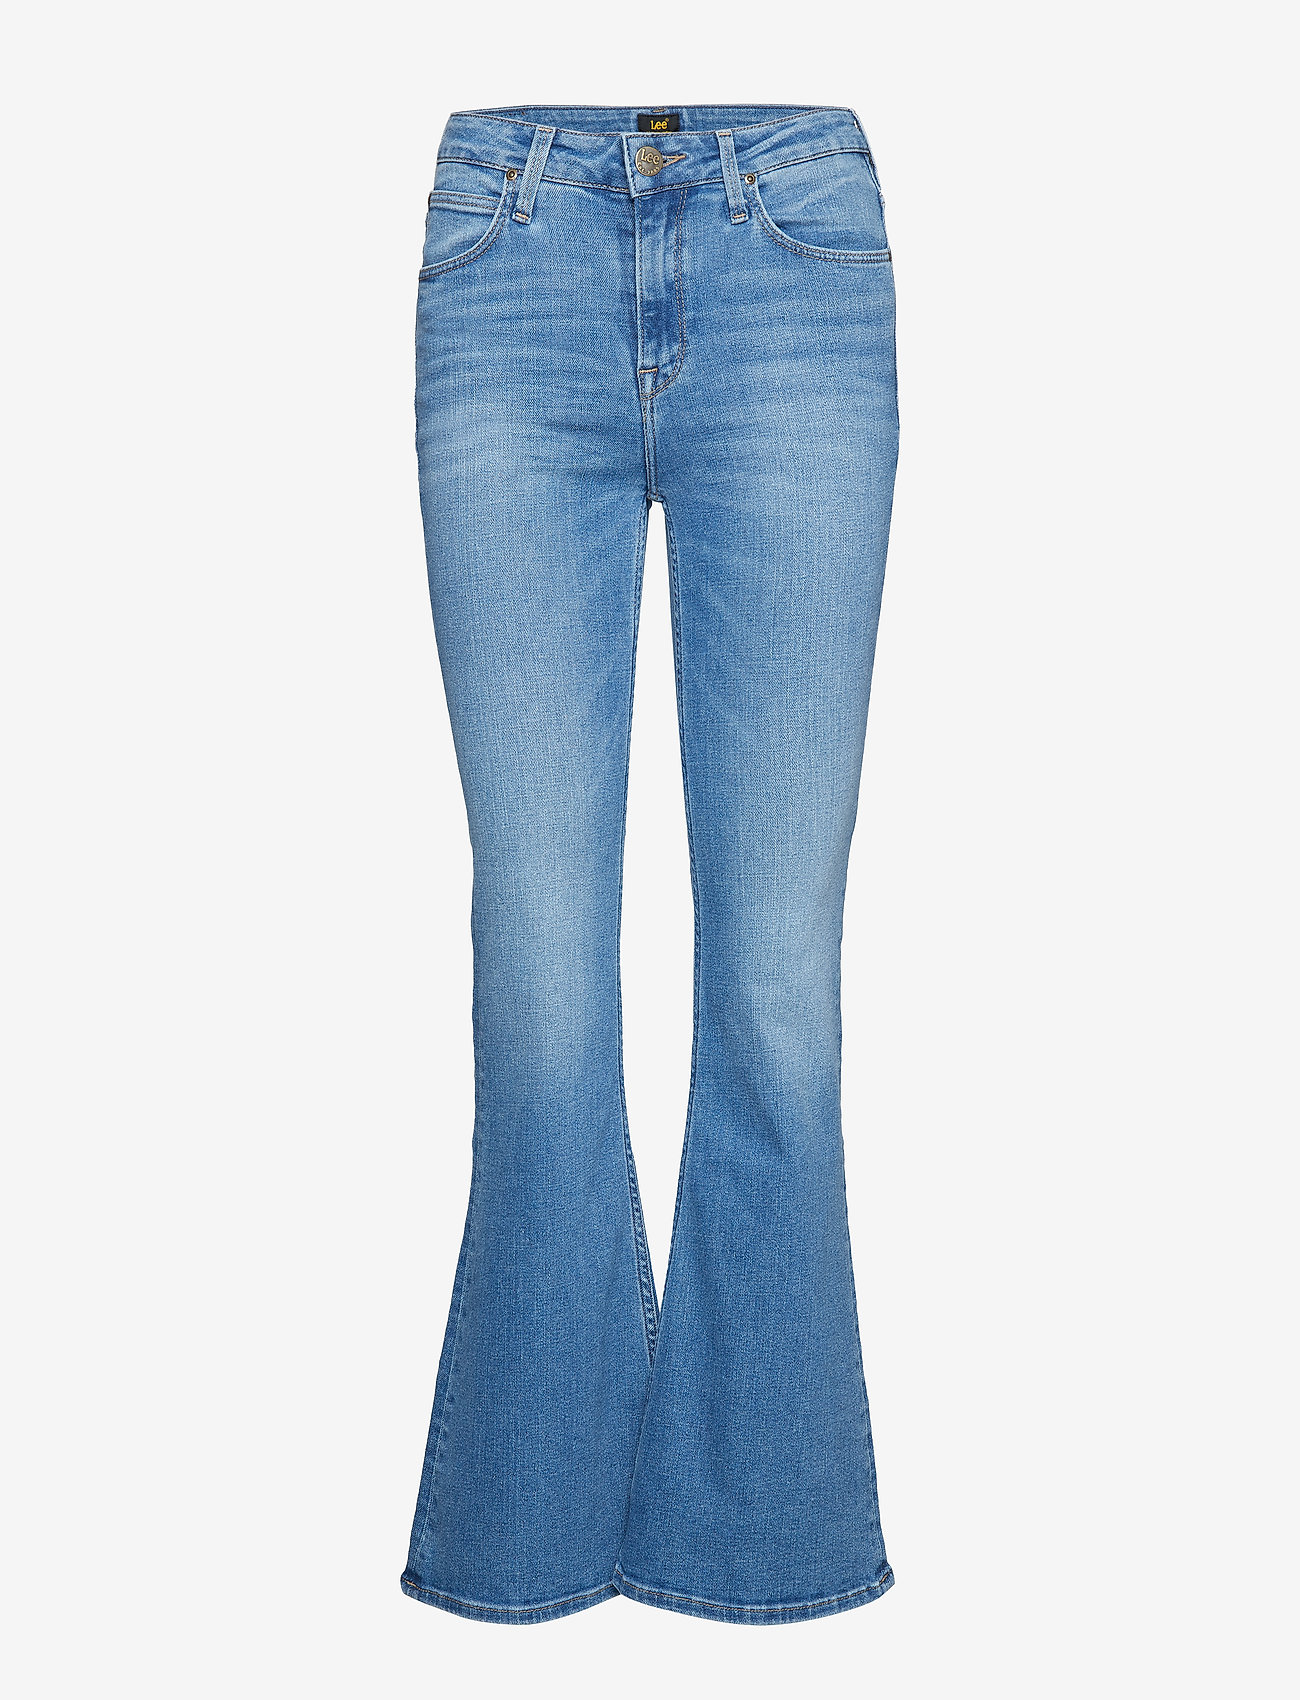 Lee Jeans - BREESE - flared jeans - jaded - 0